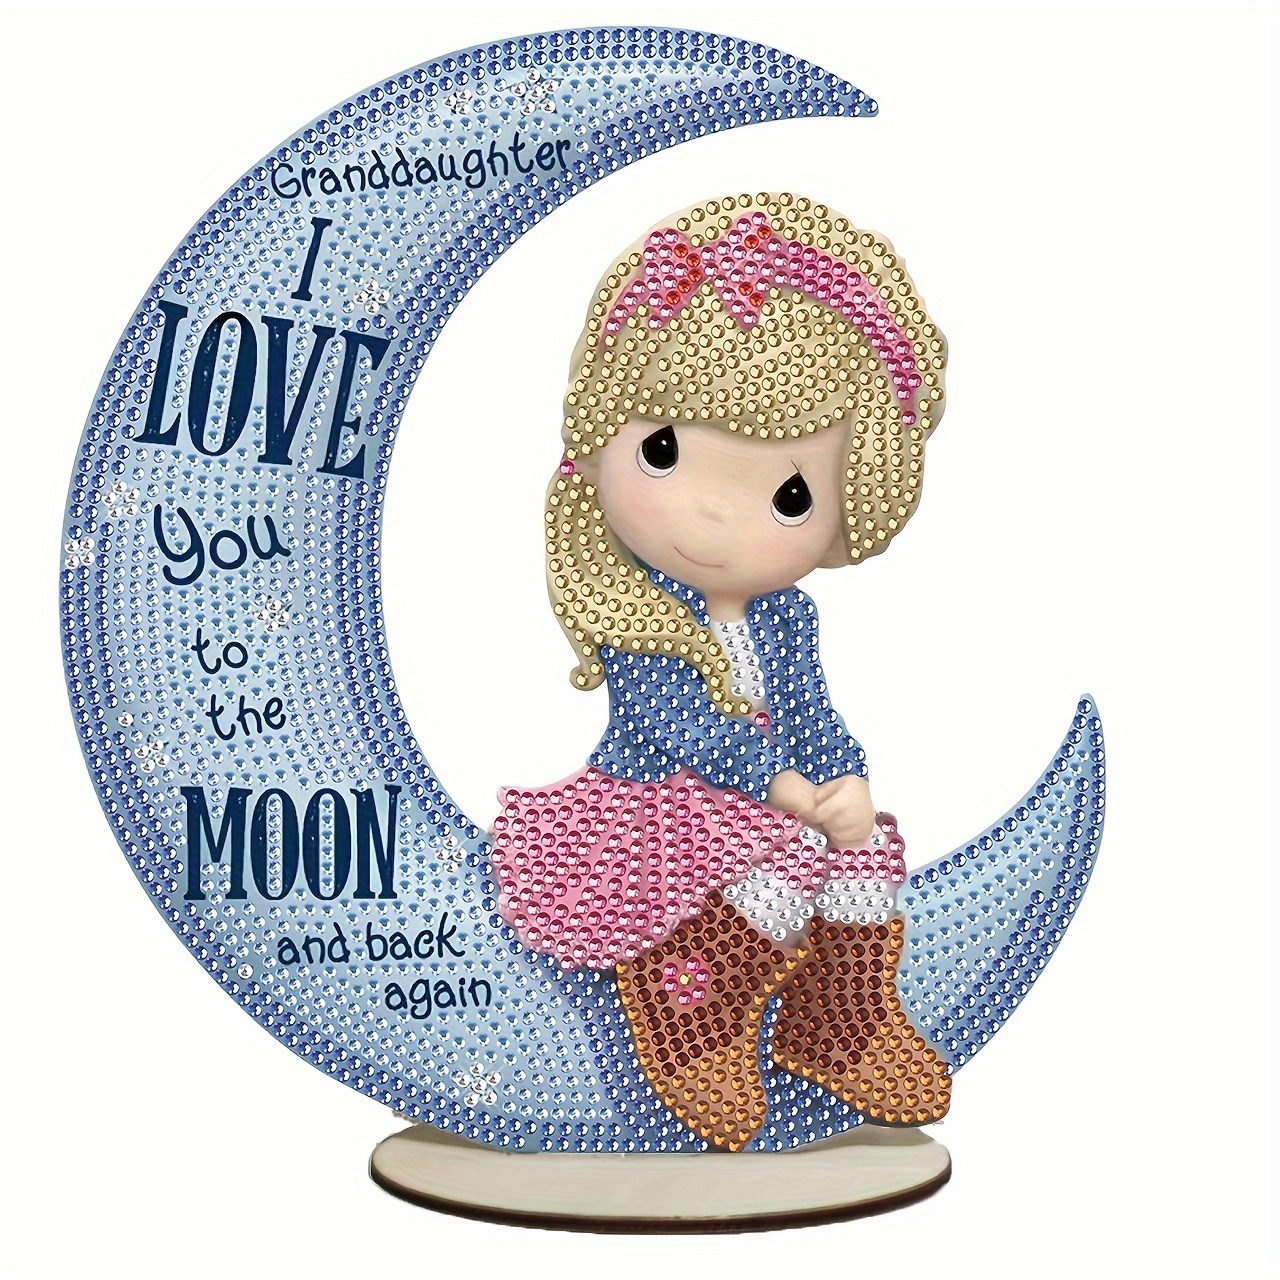 

Moon Fairy Diy Diamond Art Painting Kit - Brilliant Diamond Craft For Adults, Centerpieces, Home Decor, Gifts, And More!